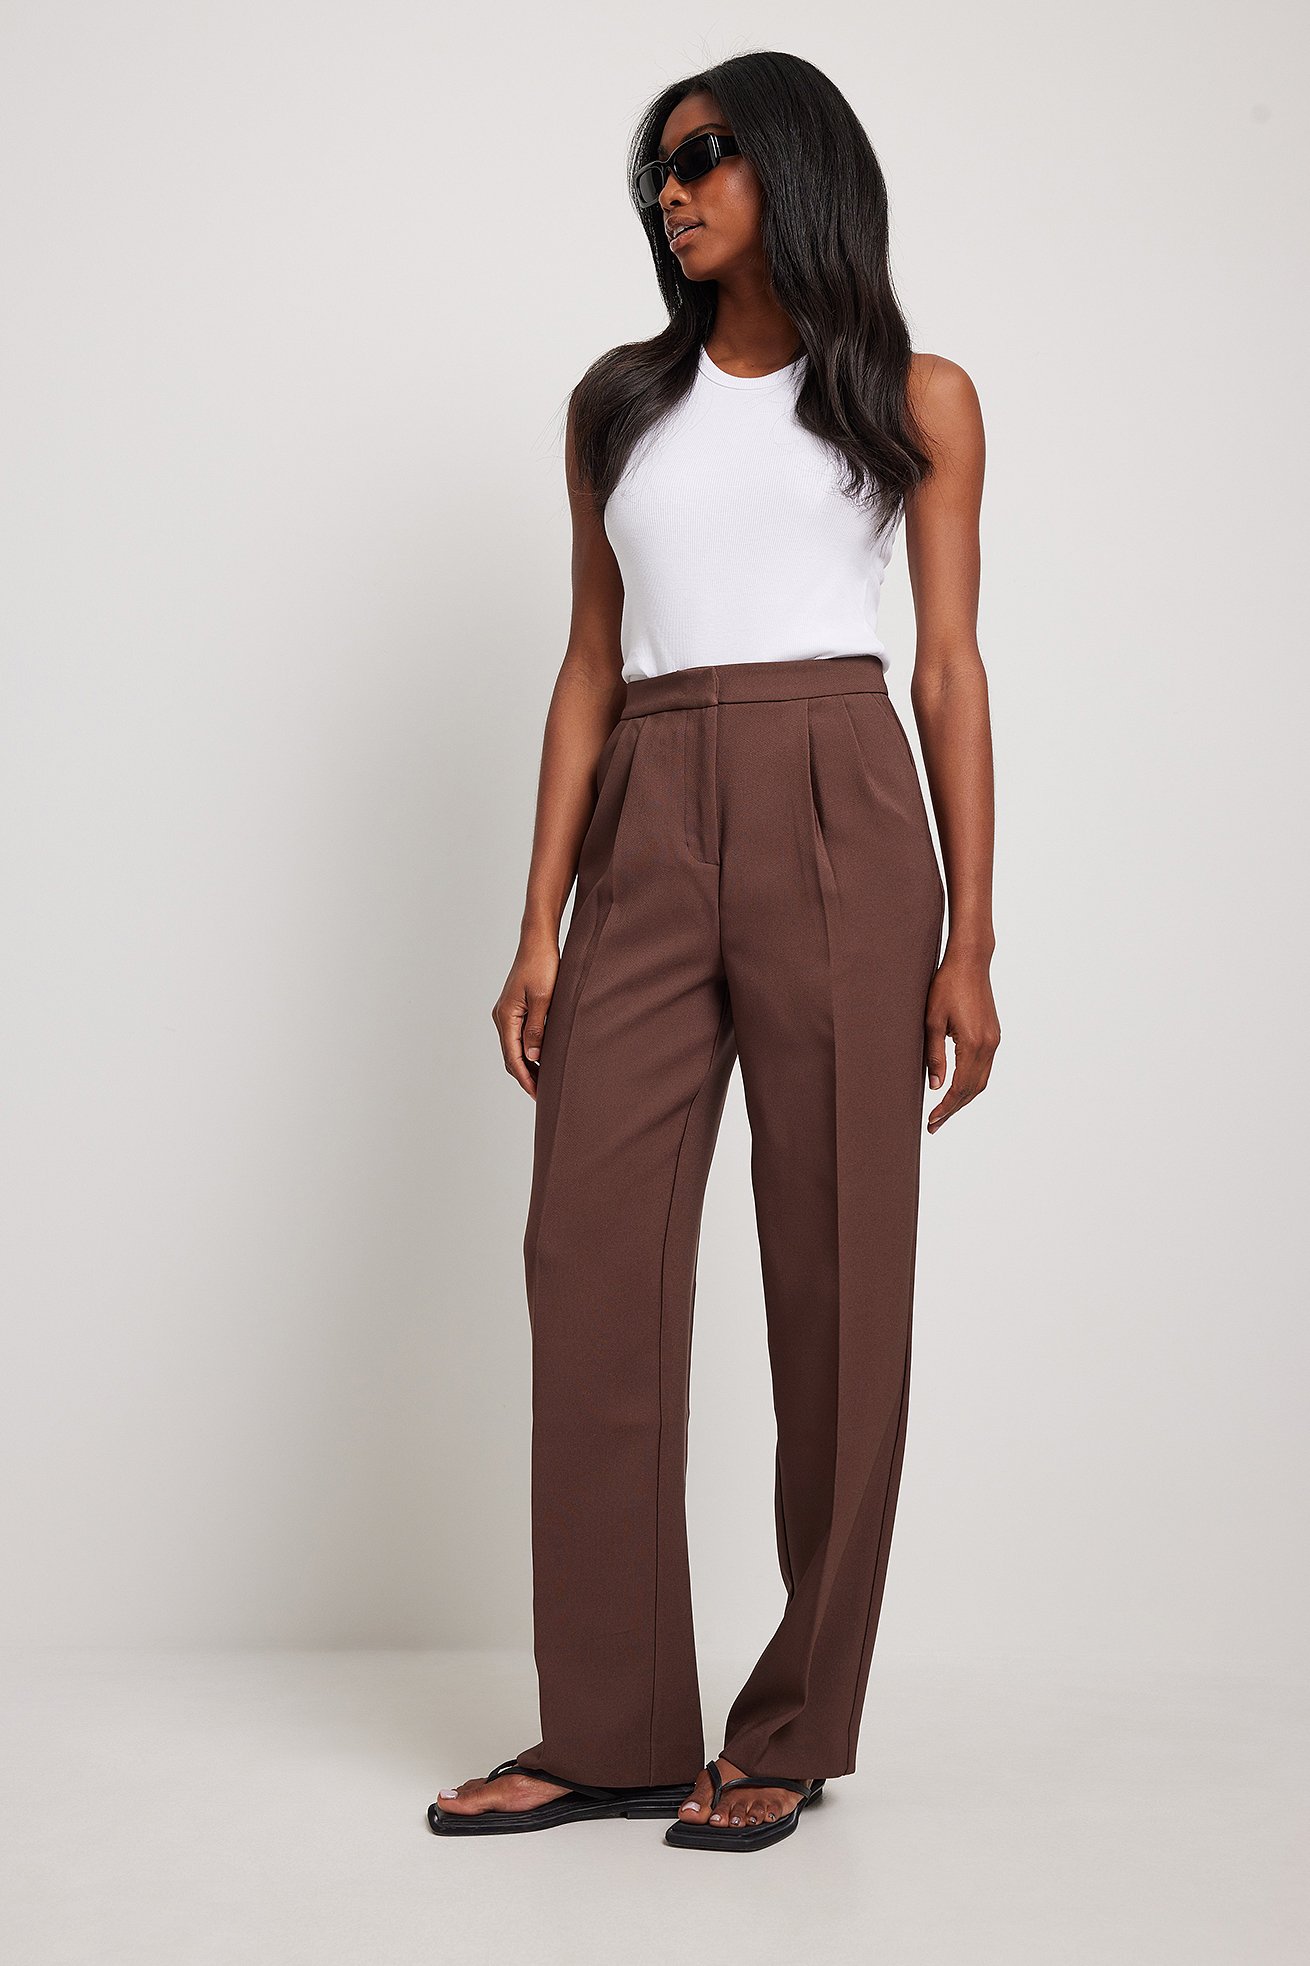 White Crop Top With Brown Trousers | Street Style Store | SSS